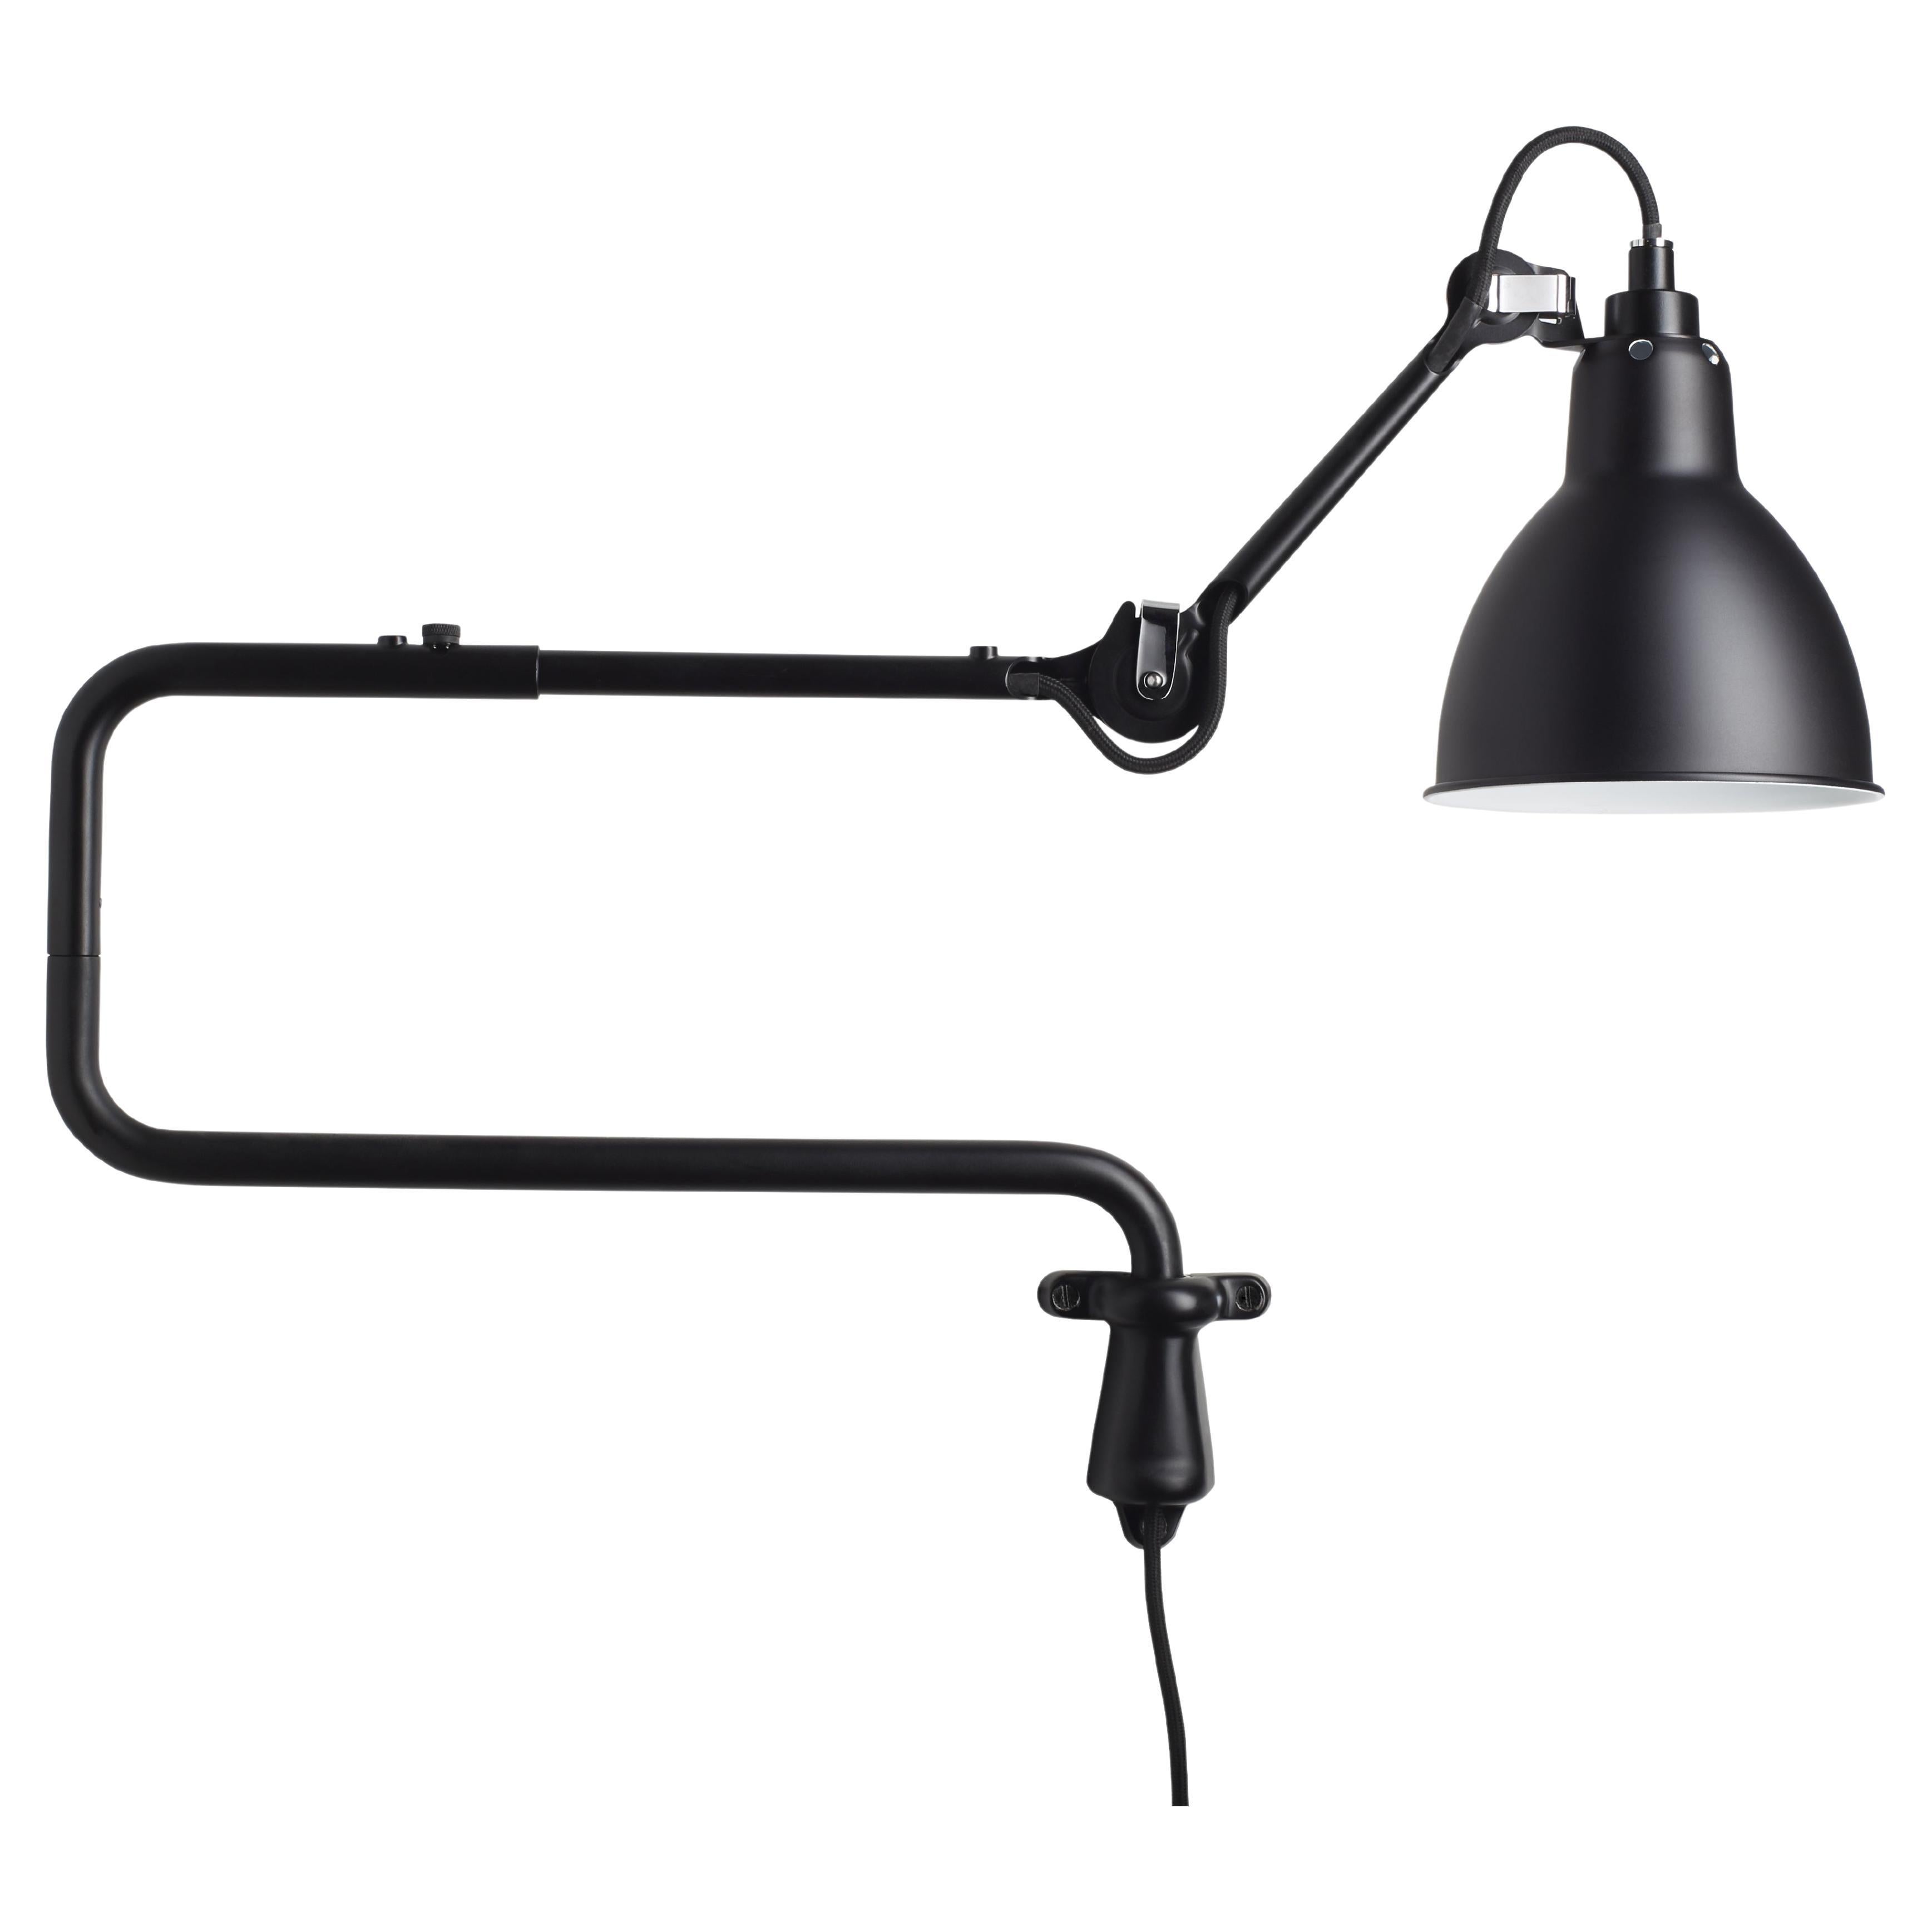 DCW Editions La Lampe Gras N°303 Wall Lamp in Black Arm and Black Shade For Sale